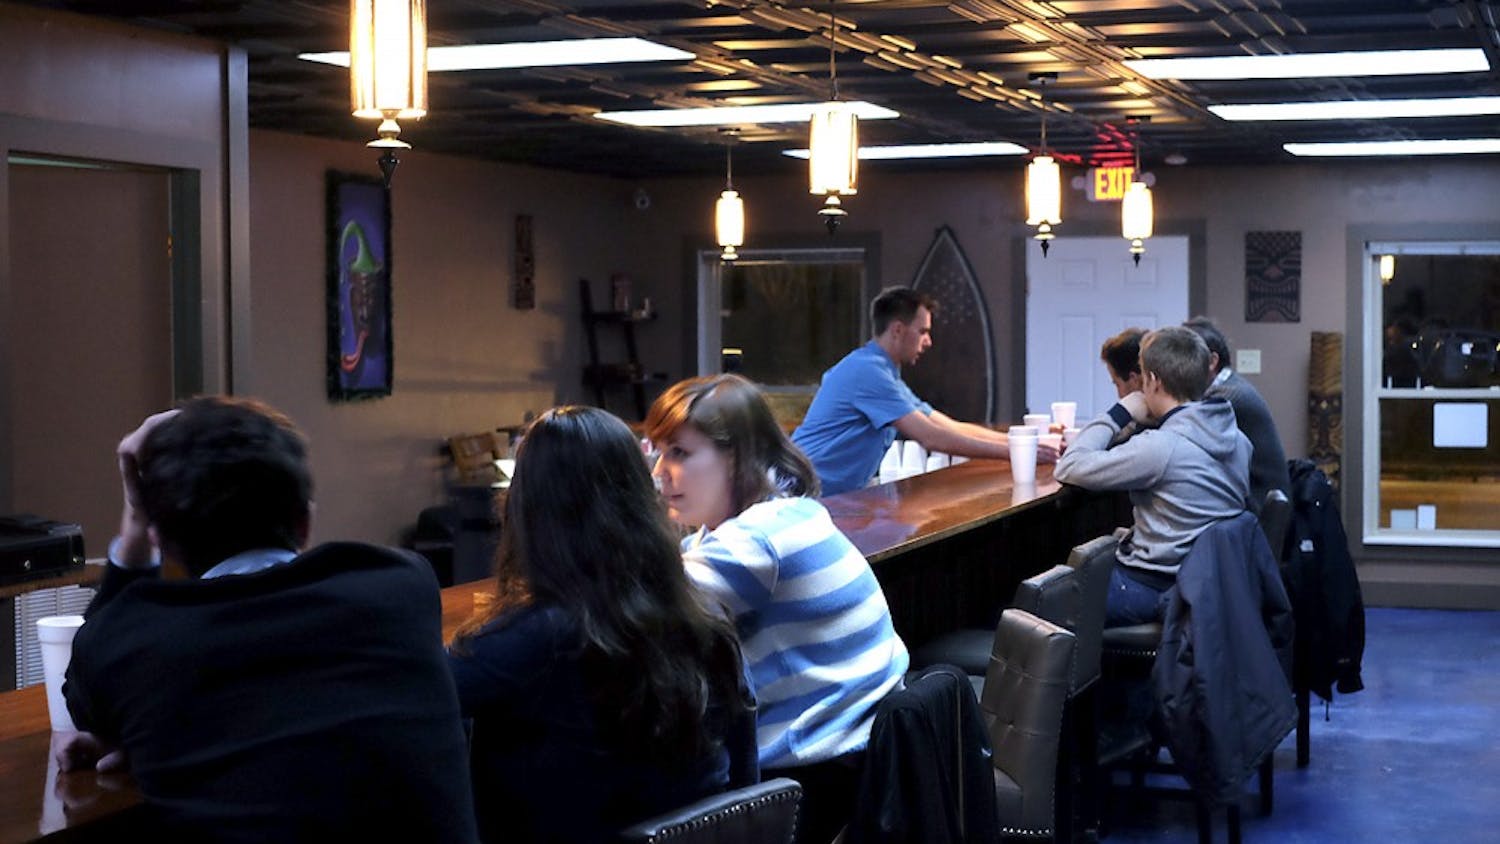 The Krave Kava Bar at 103 Main St. provides an alcohol alternative for anyone 18 and older.